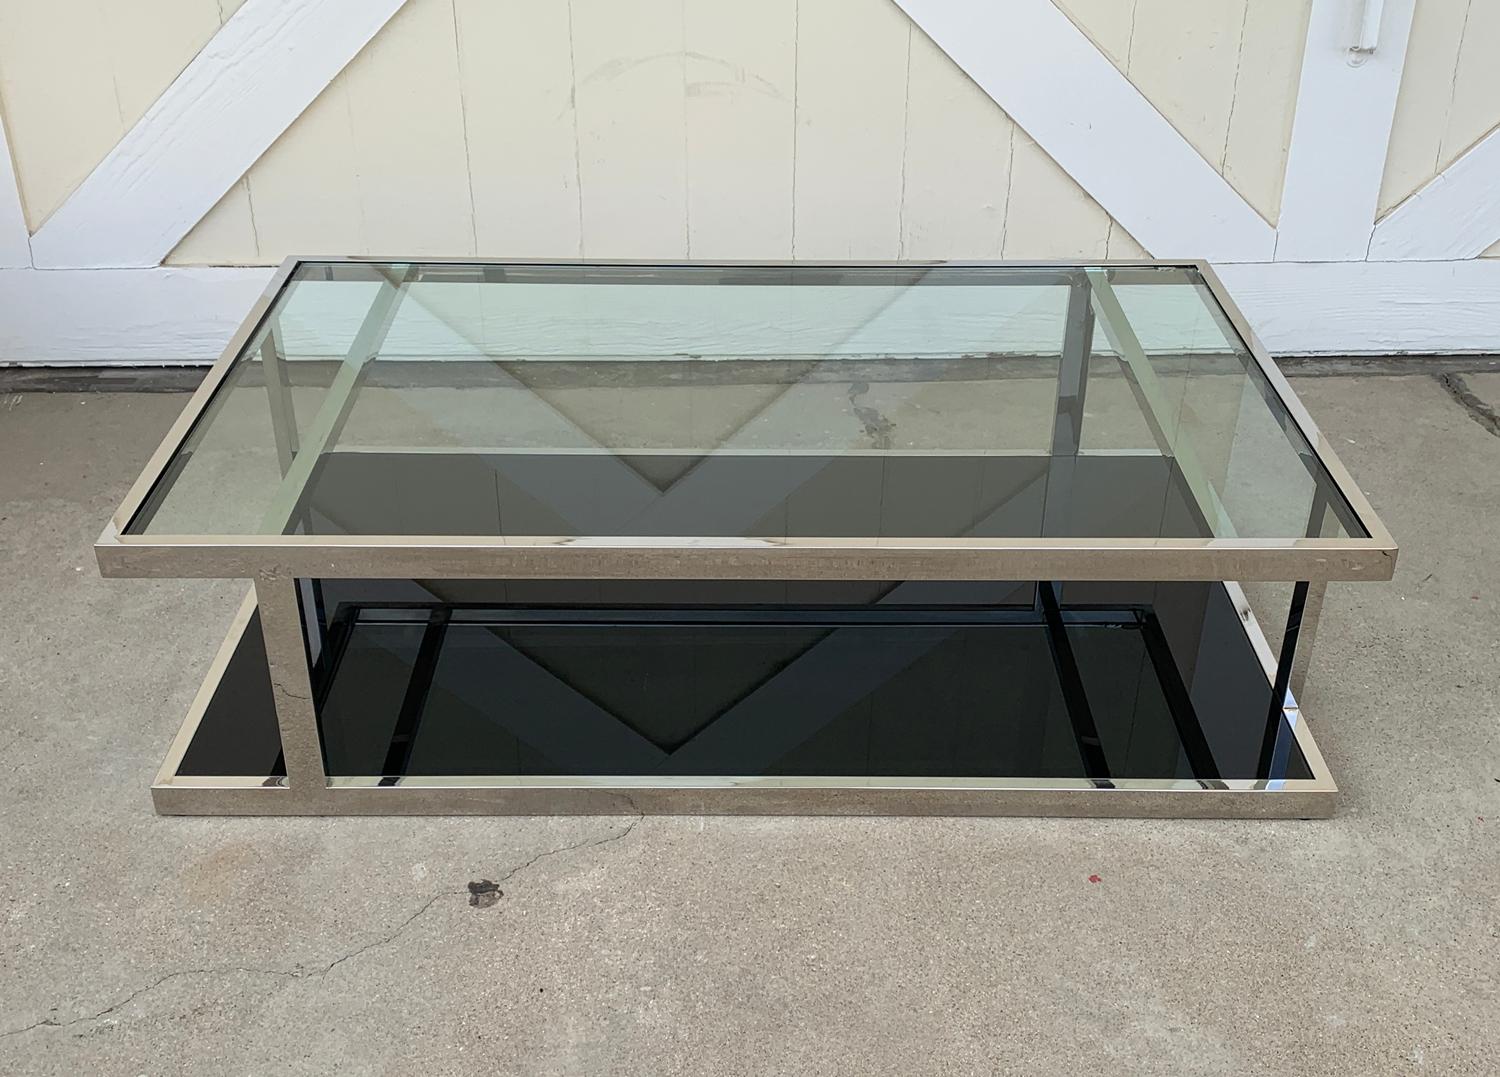 Beautiful two tier coffee table in polished chrome and glass top, bottom glass has reverse painted black glass and the top has a clear glass top.
The table sits low to the ground with only small rubber feet lifting off the ground to avoid